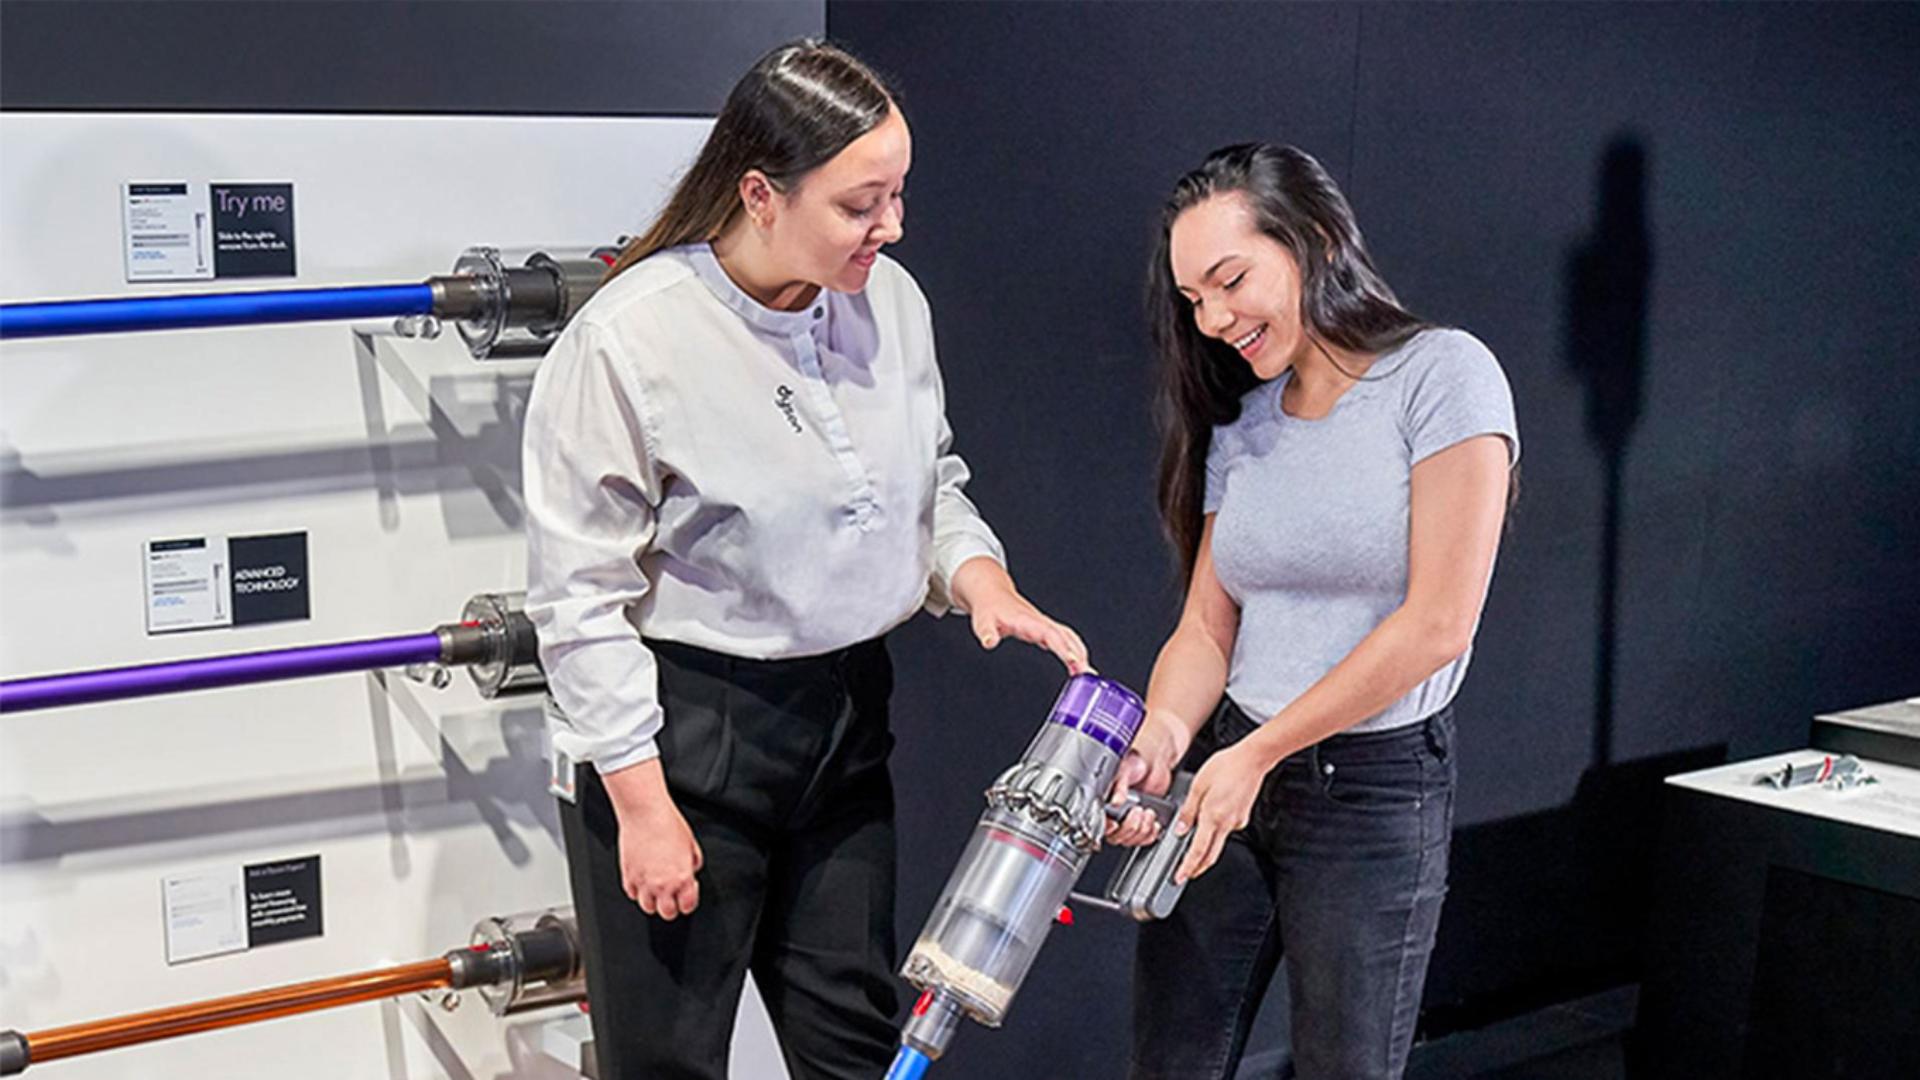 Dyson Expert talking to a customer in front of two Dyson purifiers